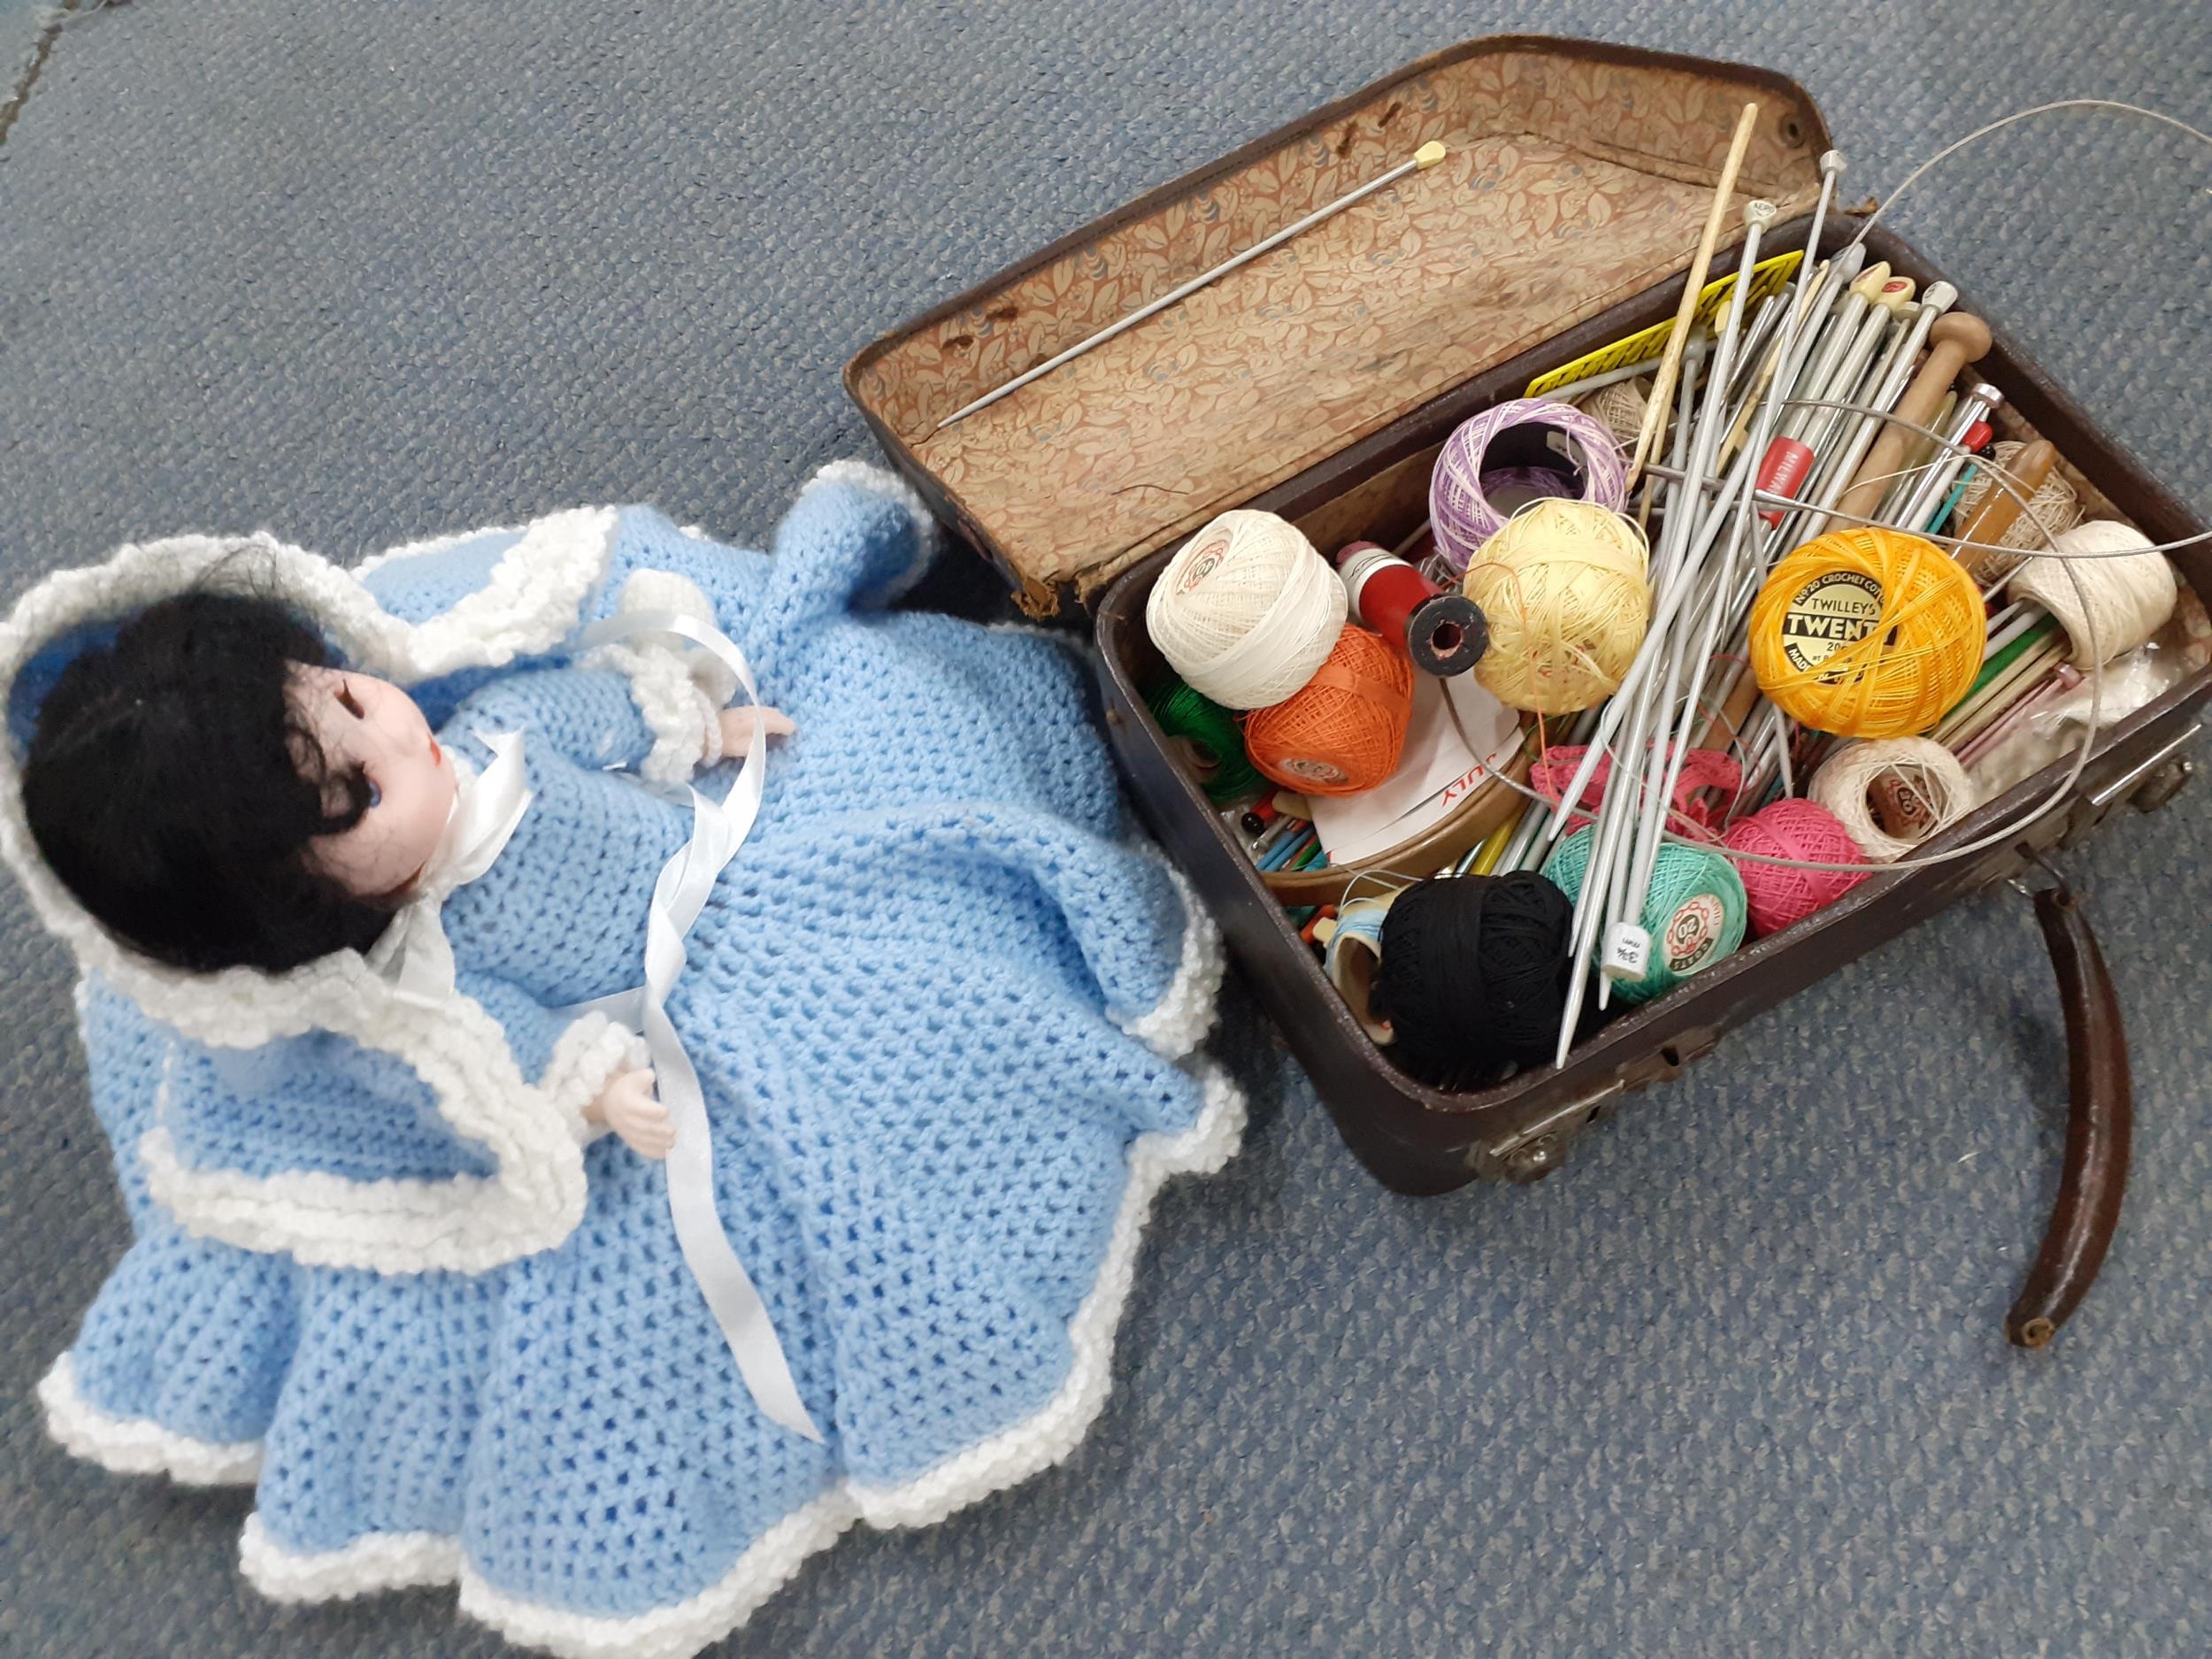 A small knitted case with needles and reels together with a 1970's bed dolly in knitted outfit